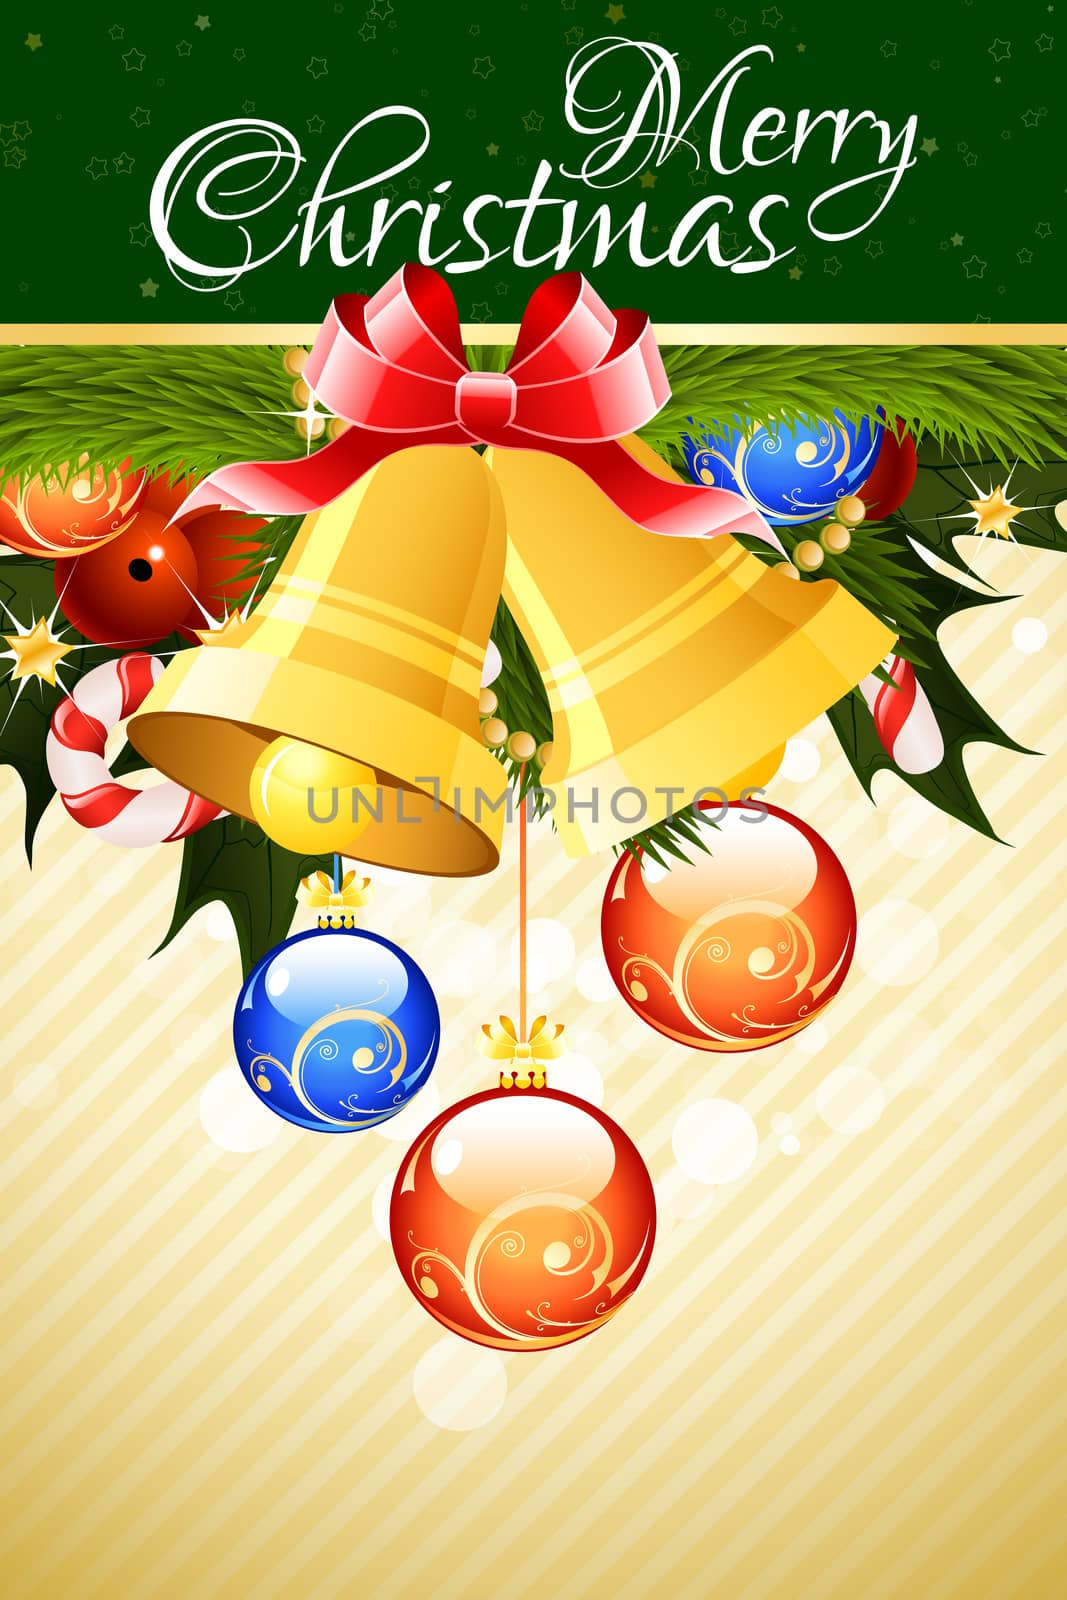 Merry Christmas Greeting Card with Bells and Christmas Balls